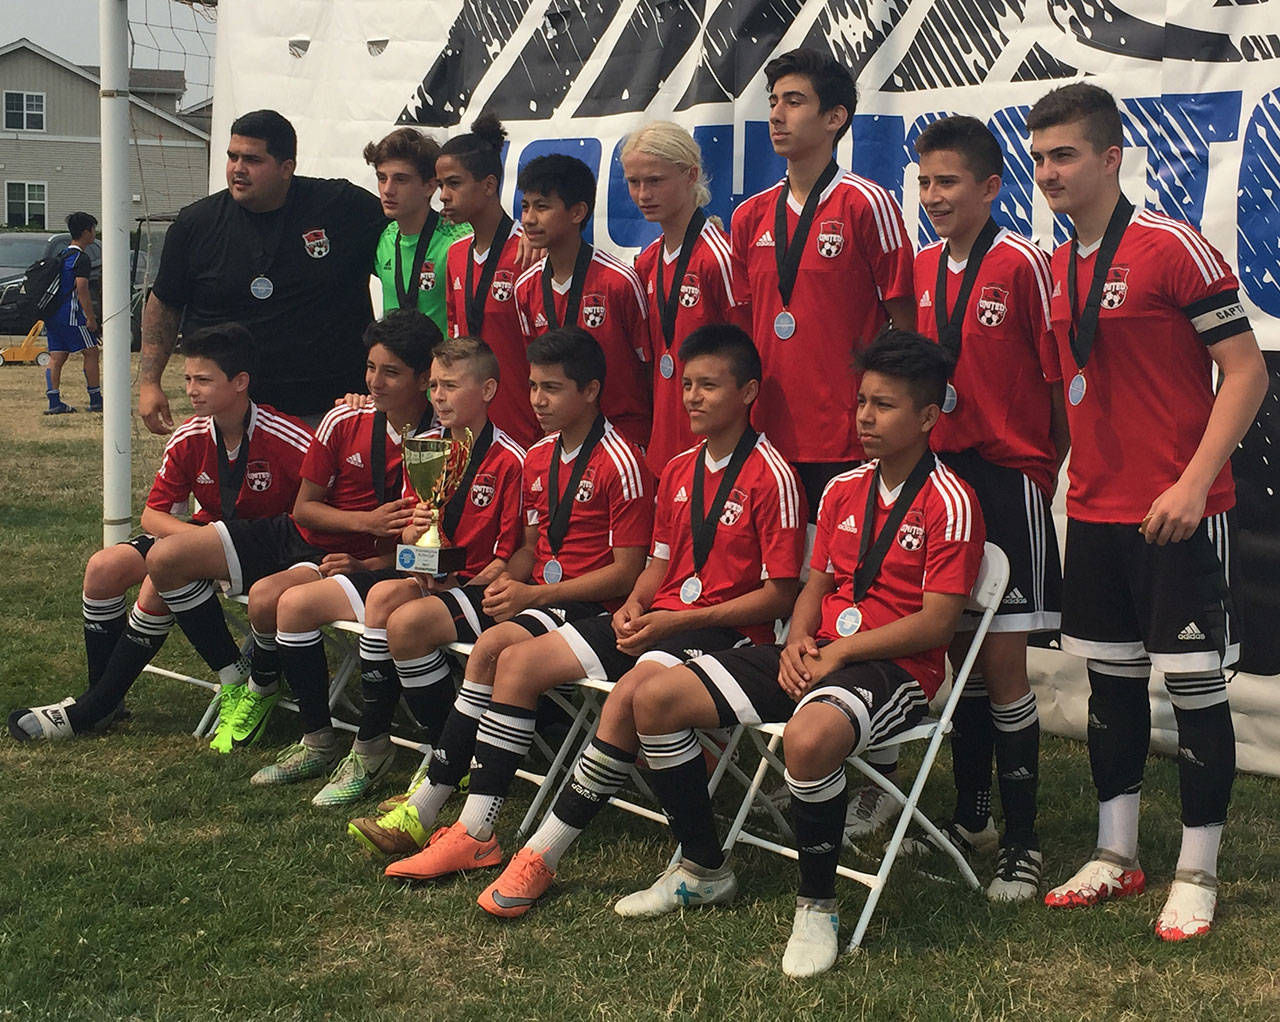 Matt Kelley (third from right, back row) helped Northwest United win the Rush Cup this weekend. (Submitted photo)